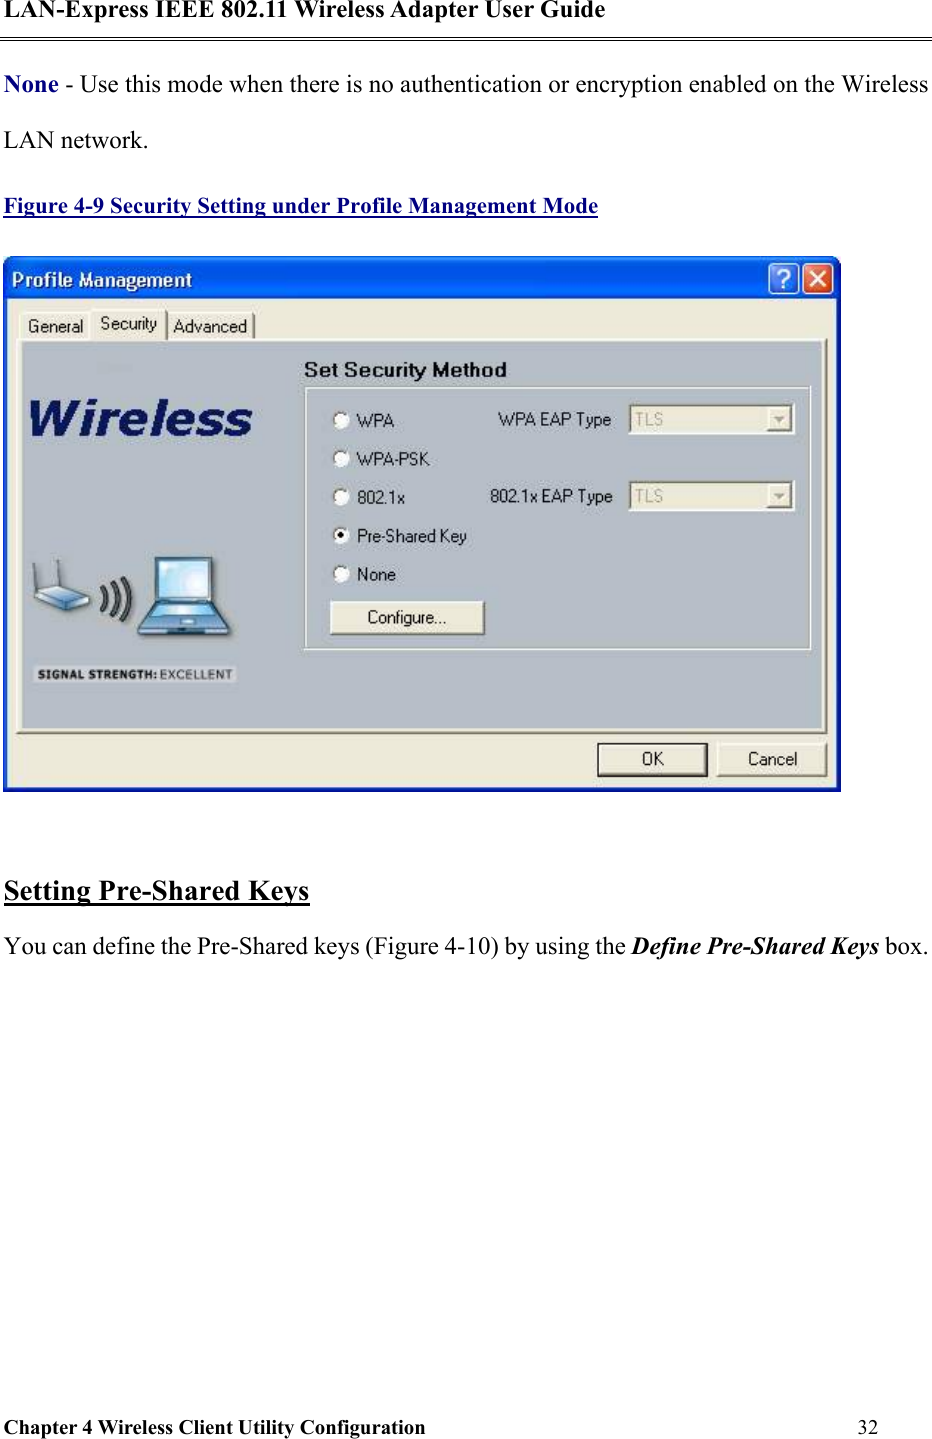 LAN-Express IEEE 802.11 Wireless Adapter User Guide Chapter 4 Wireless Client Utility Configuration   32  None - Use this mode when there is no authentication or encryption enabled on the Wireless LAN network. Figure 4-9 Security Setting under Profile Management Mode   Setting Pre-Shared Keys You can define the Pre-Shared keys (Figure 4-10) by using the Define Pre-Shared Keys box. 